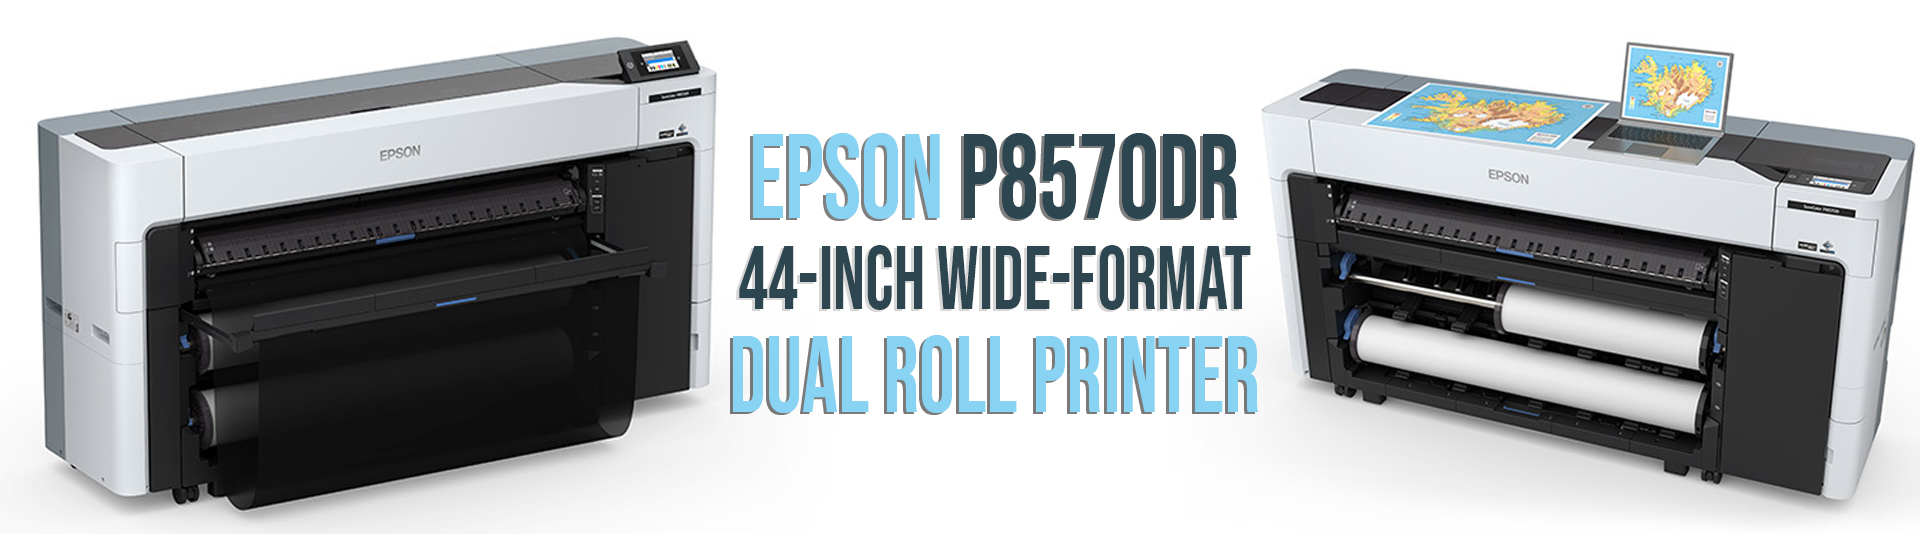 Epson P8570DR Available at Pro Digital gear!